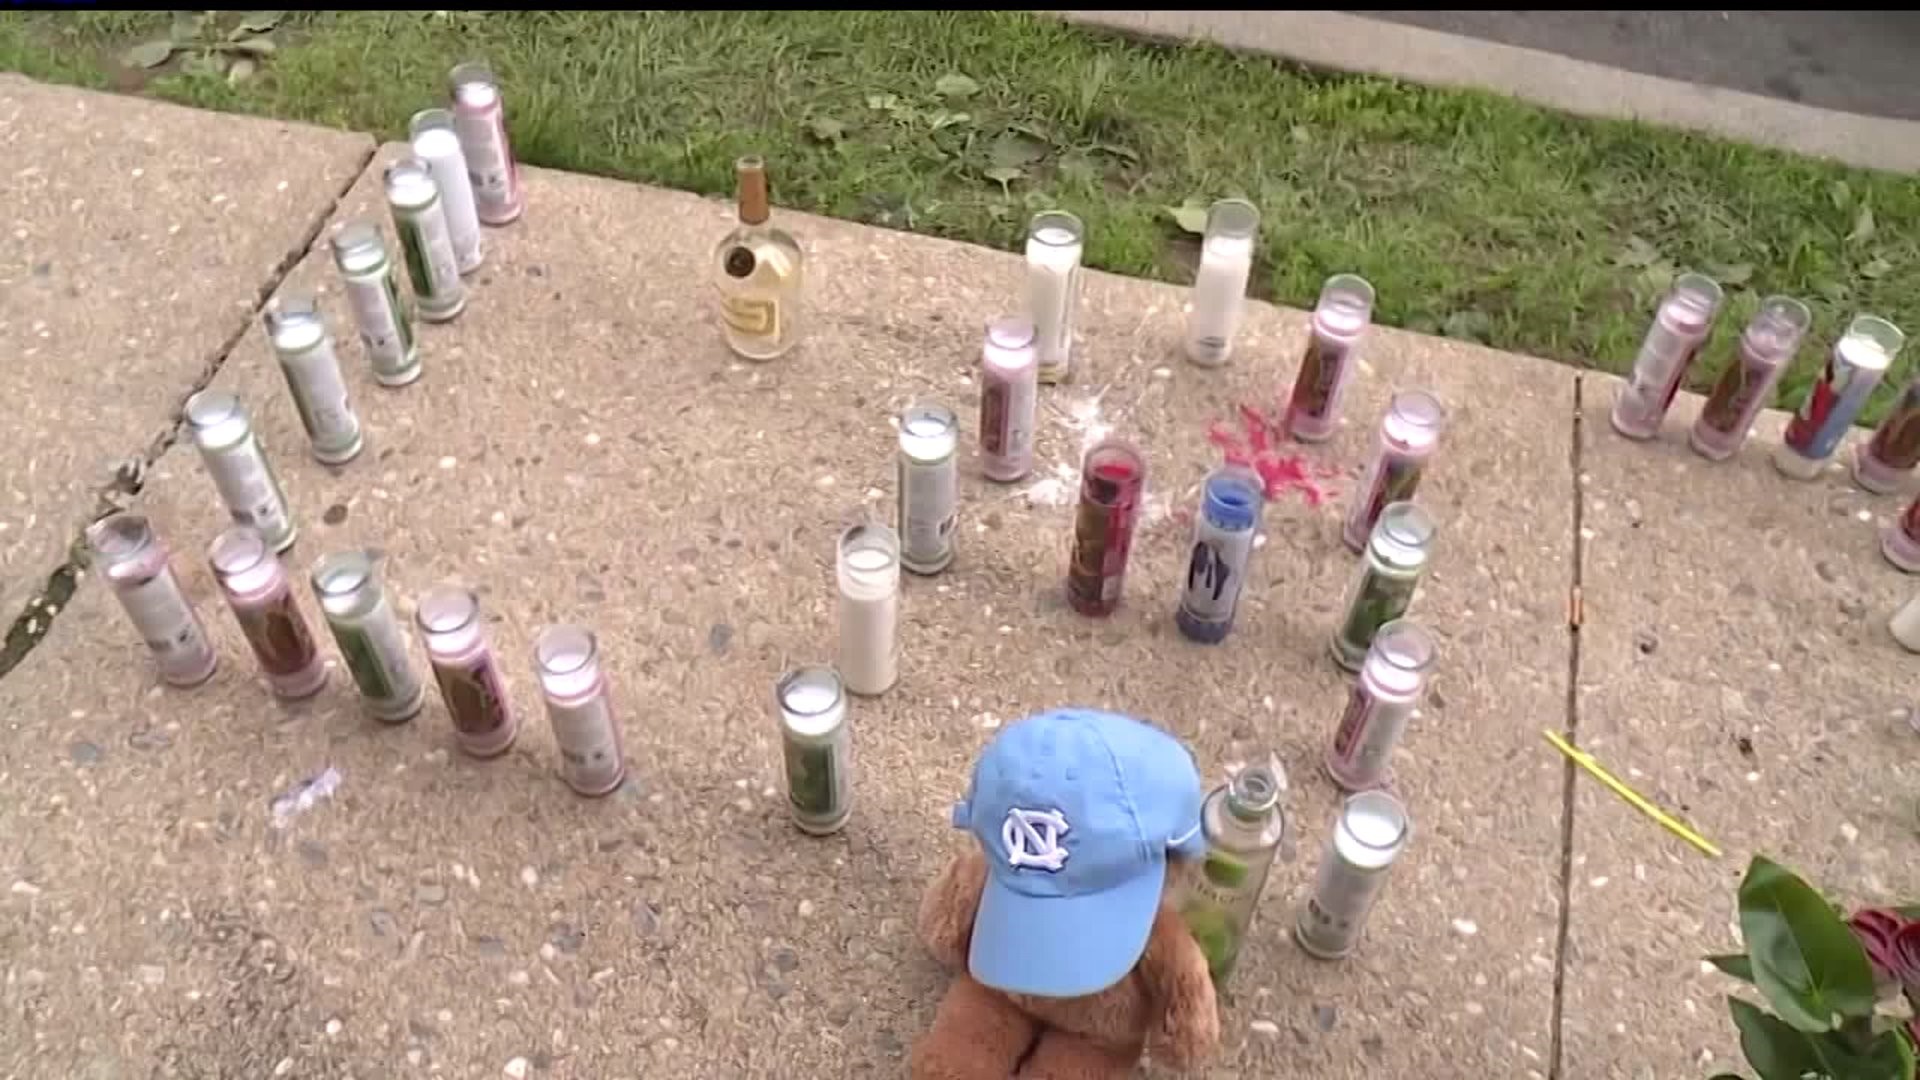 Community desperate for change after two homicides in a week